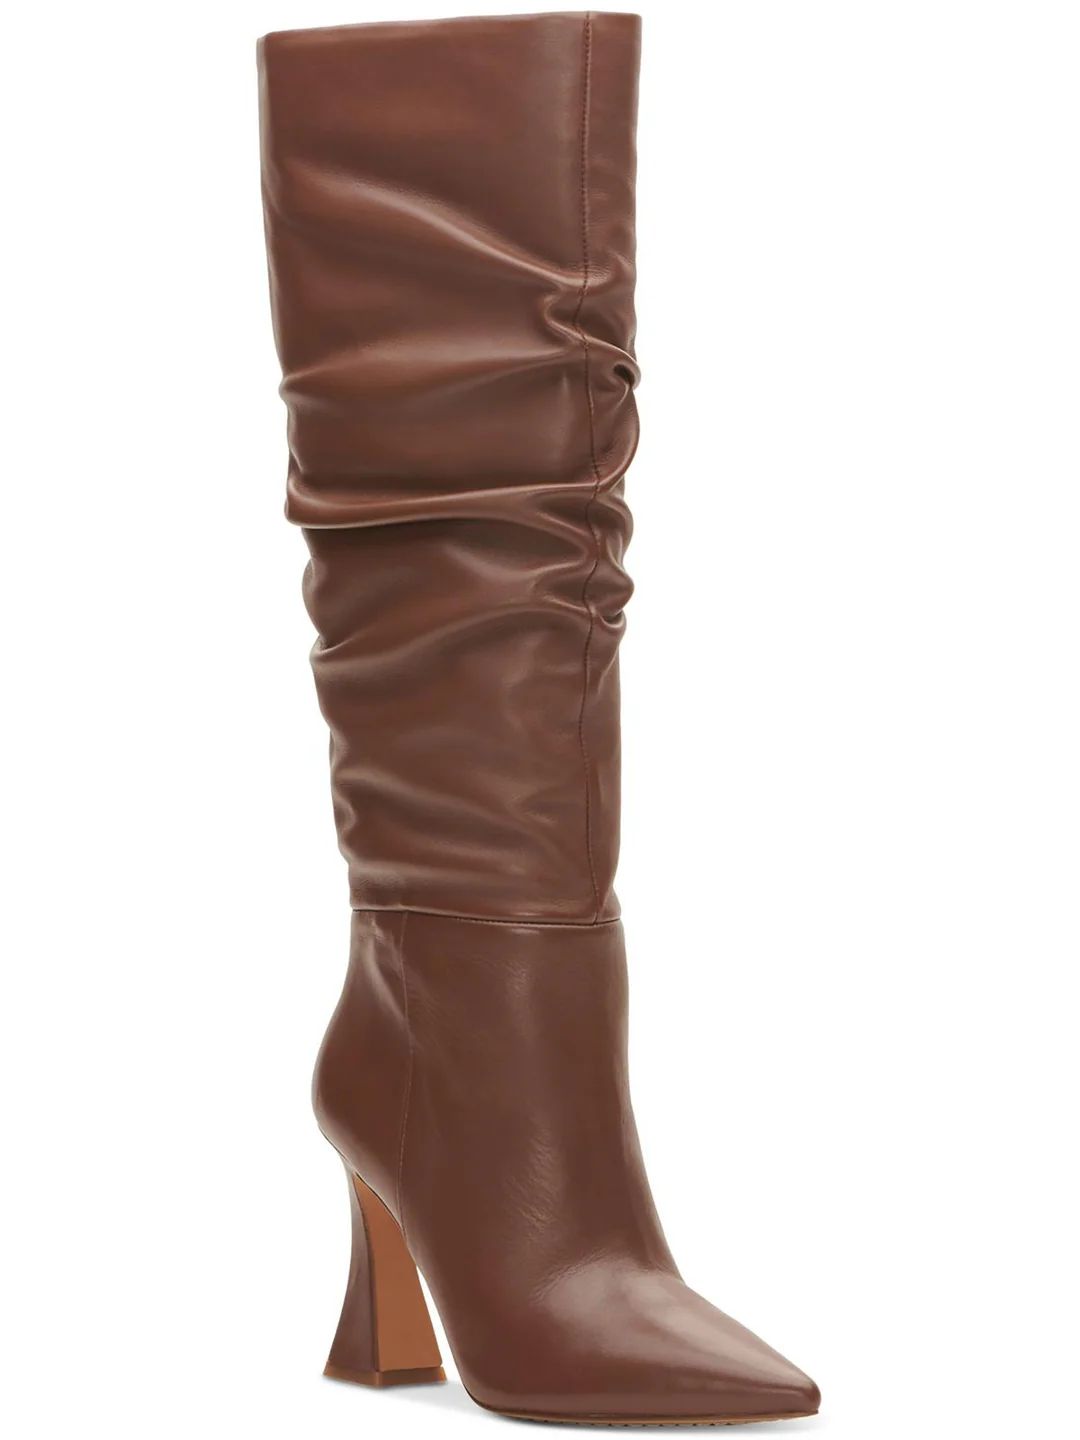 Alinkay Womens Suede Slouchy Knee-High Boots | Shop Premium Outlets